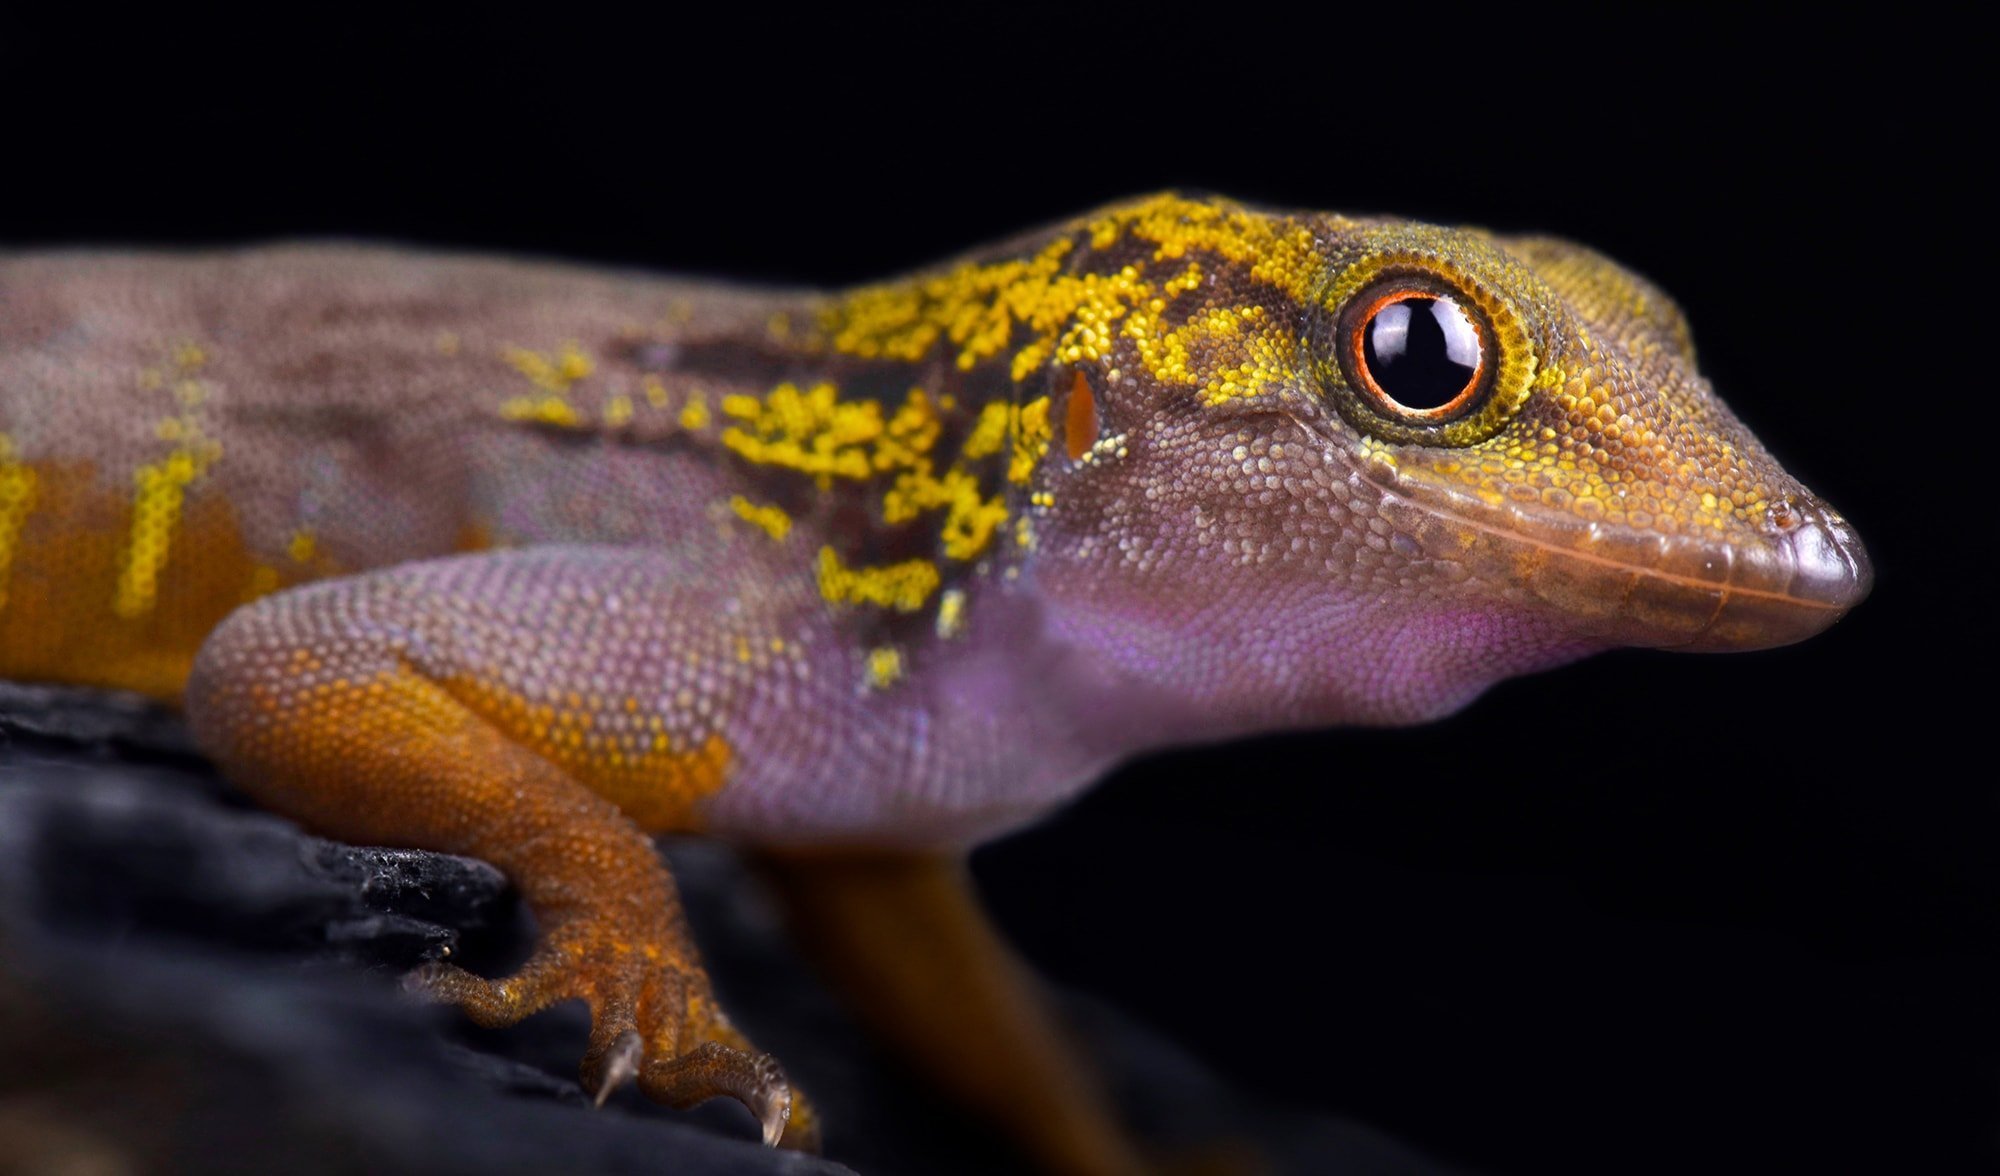 The psychedelic rock gecko is one of the rarest reptiles on Earth